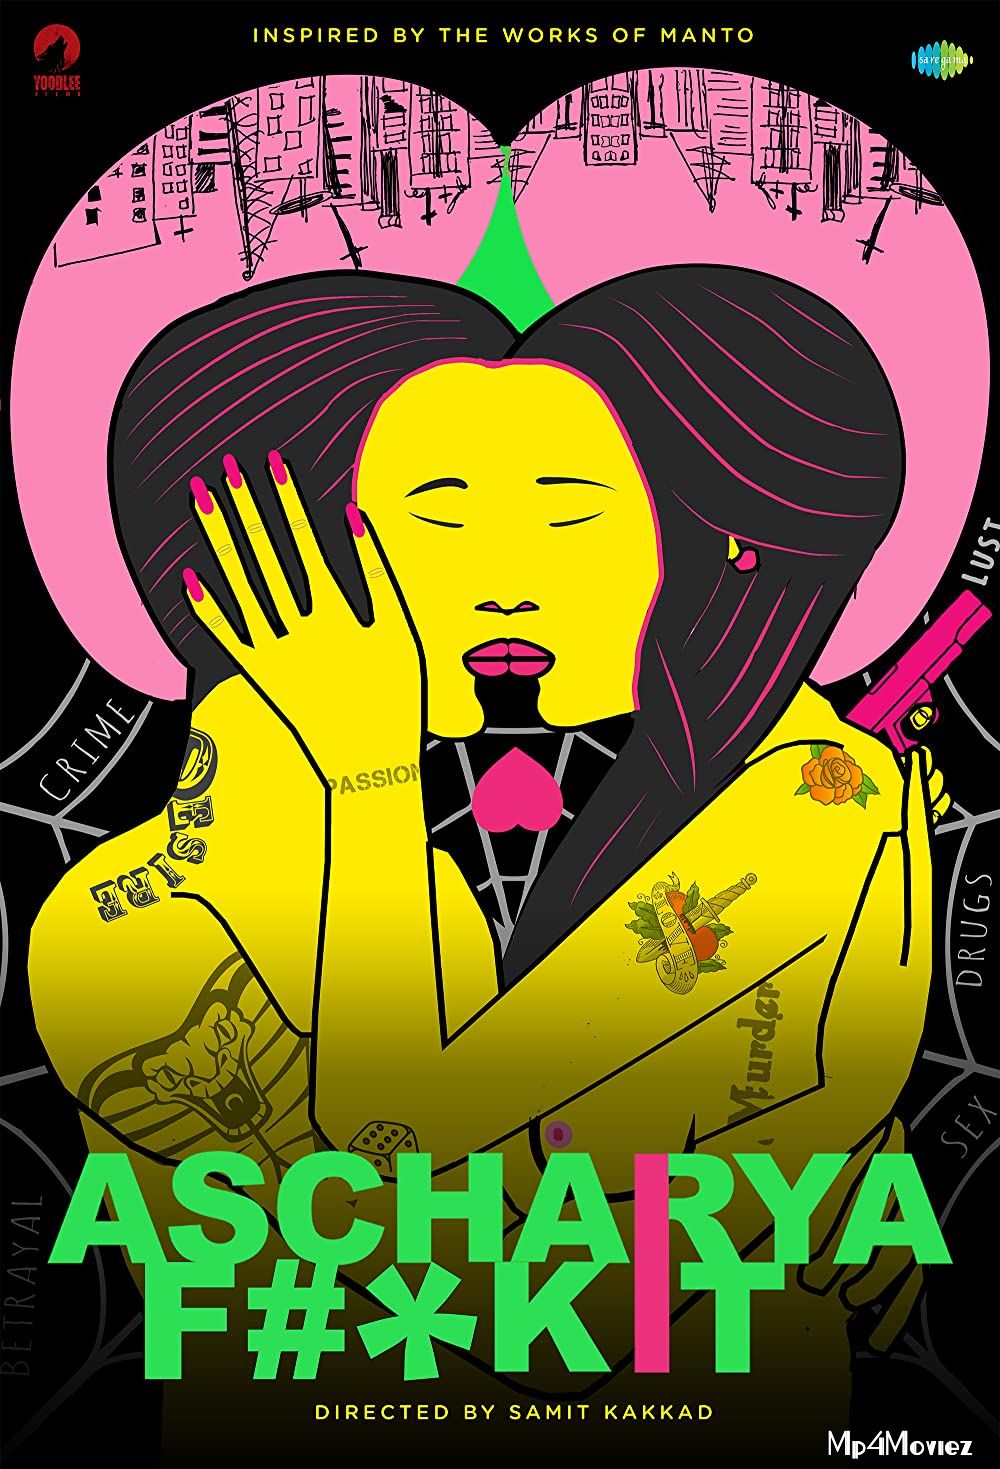 18+ Ascharya Fk It 2018 Hindi UNRATED Movie download full movie